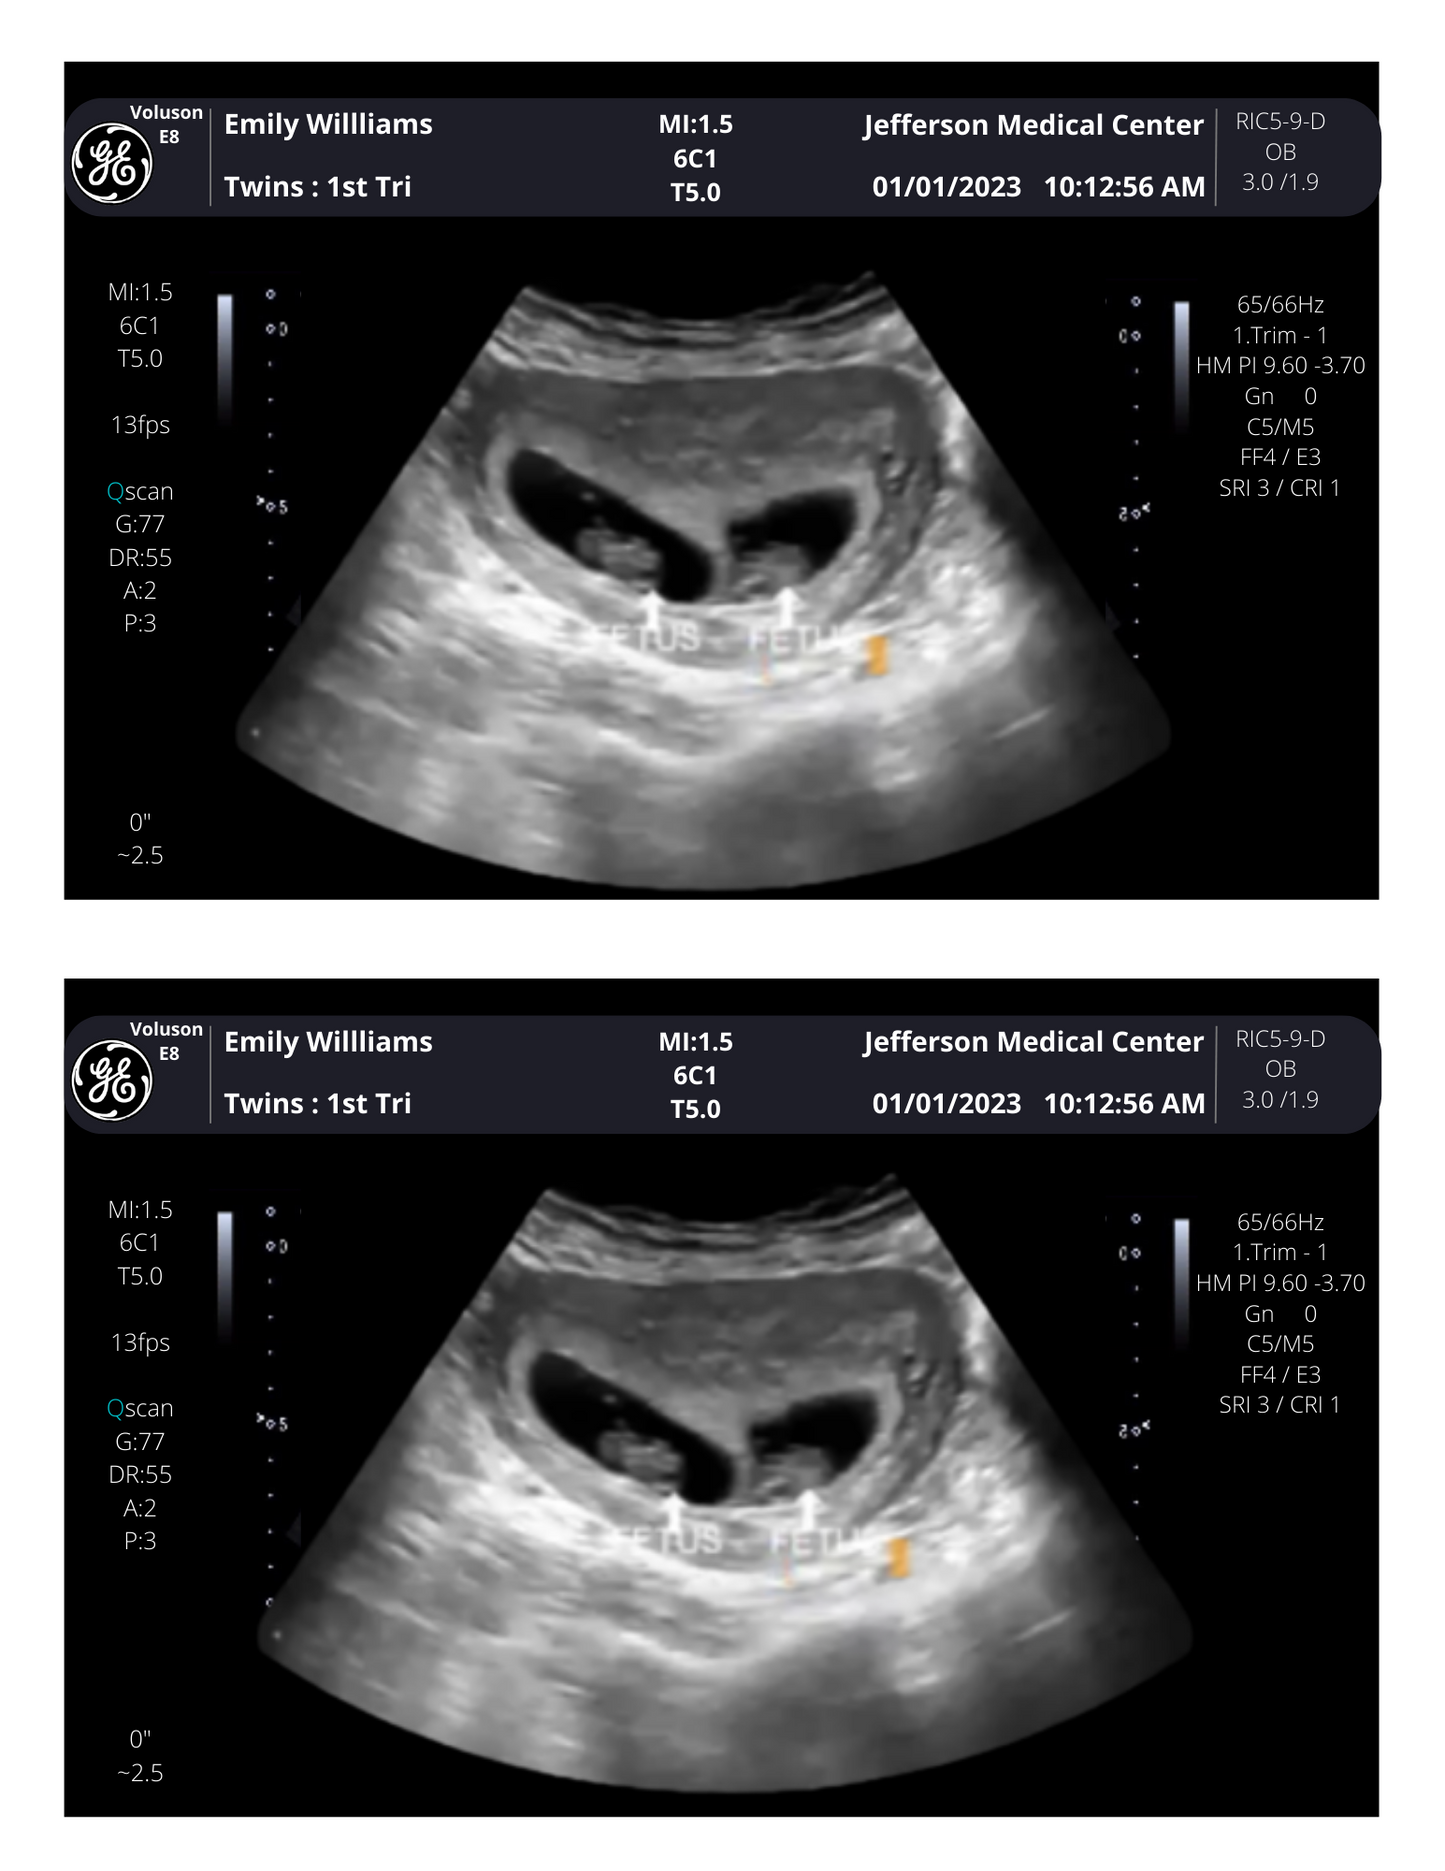 On SALE!! Fake Ultrasound Picture | INSTANT DOWNLOAD!! Customized Digital Sonogram Picture |